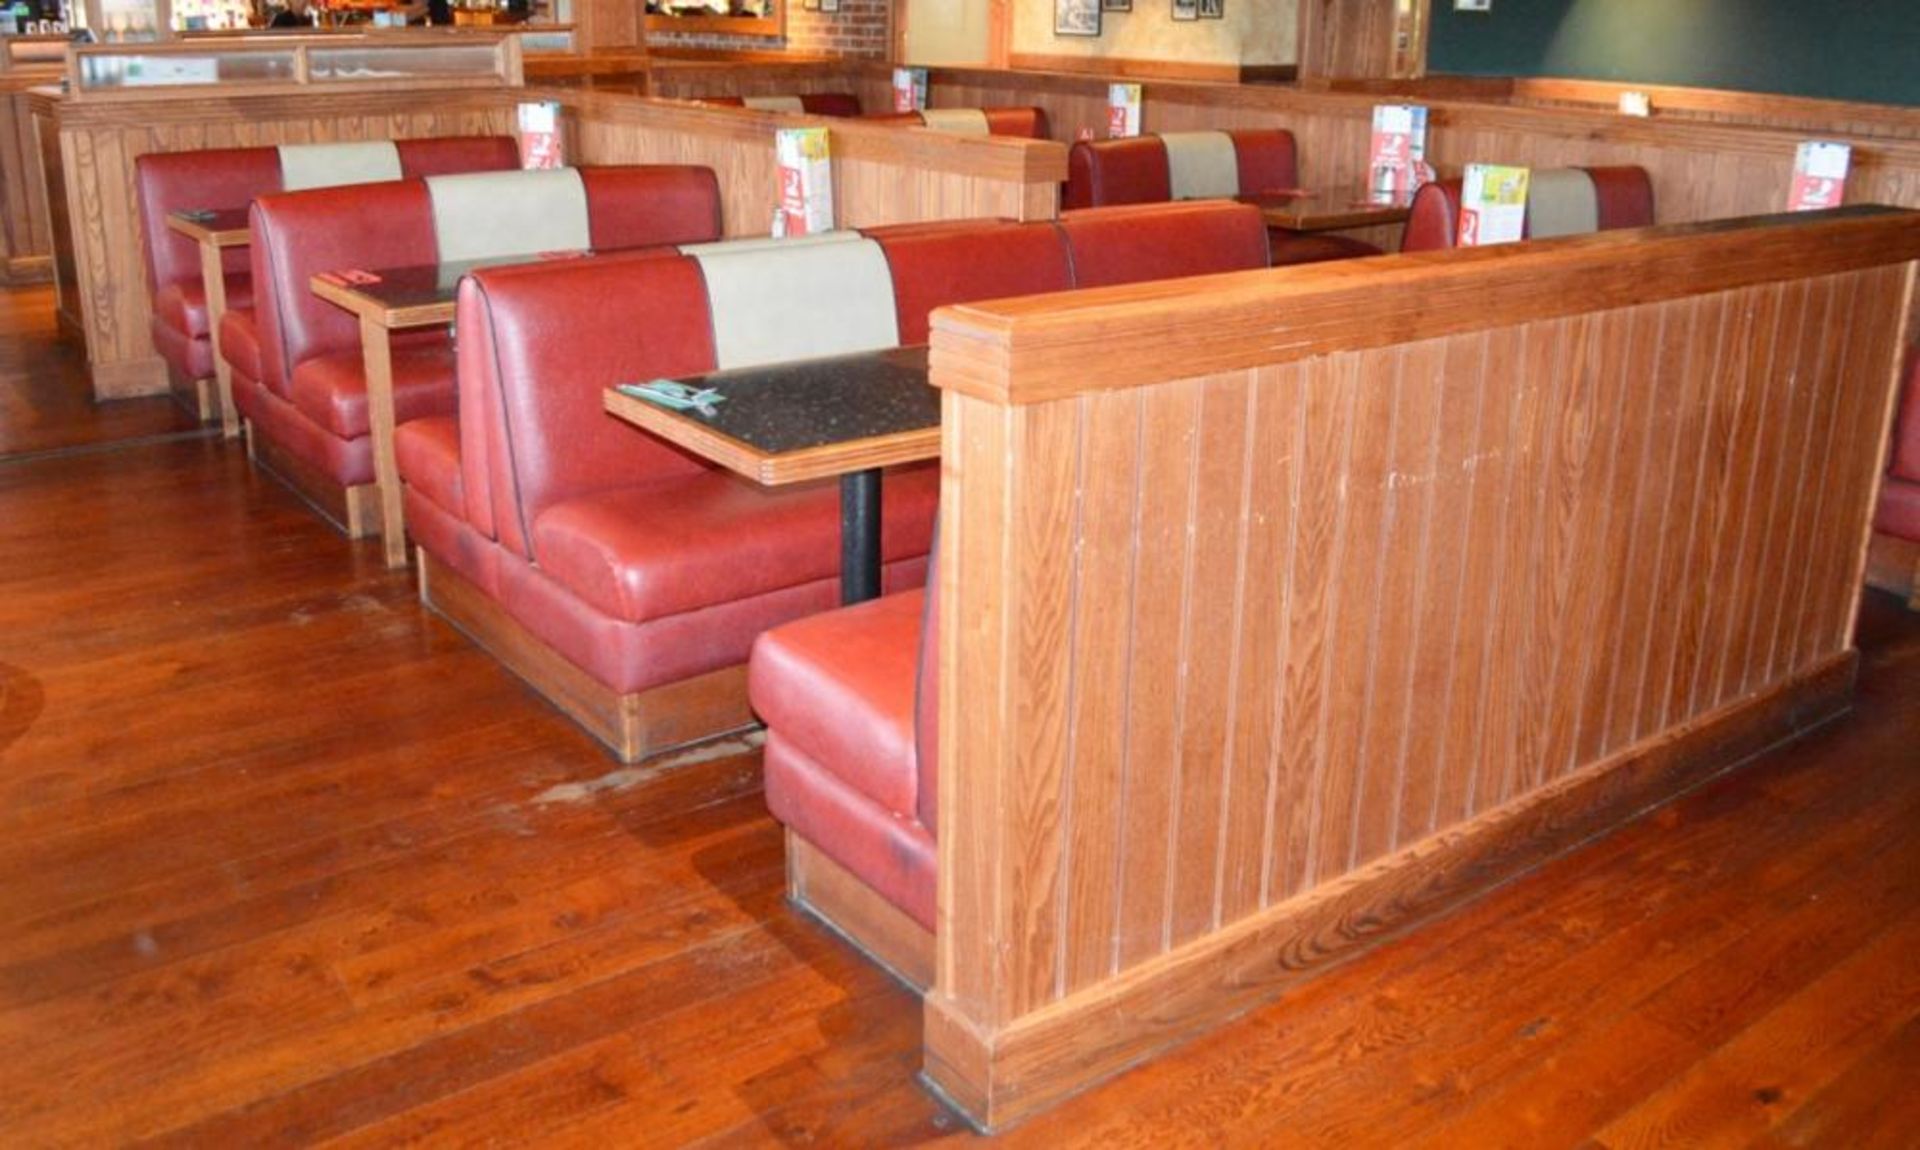 1 x Selection of Cosy Bespoke Seating Booths in a 1950's Retro American Diner Design With Dining Tab - Image 6 of 30